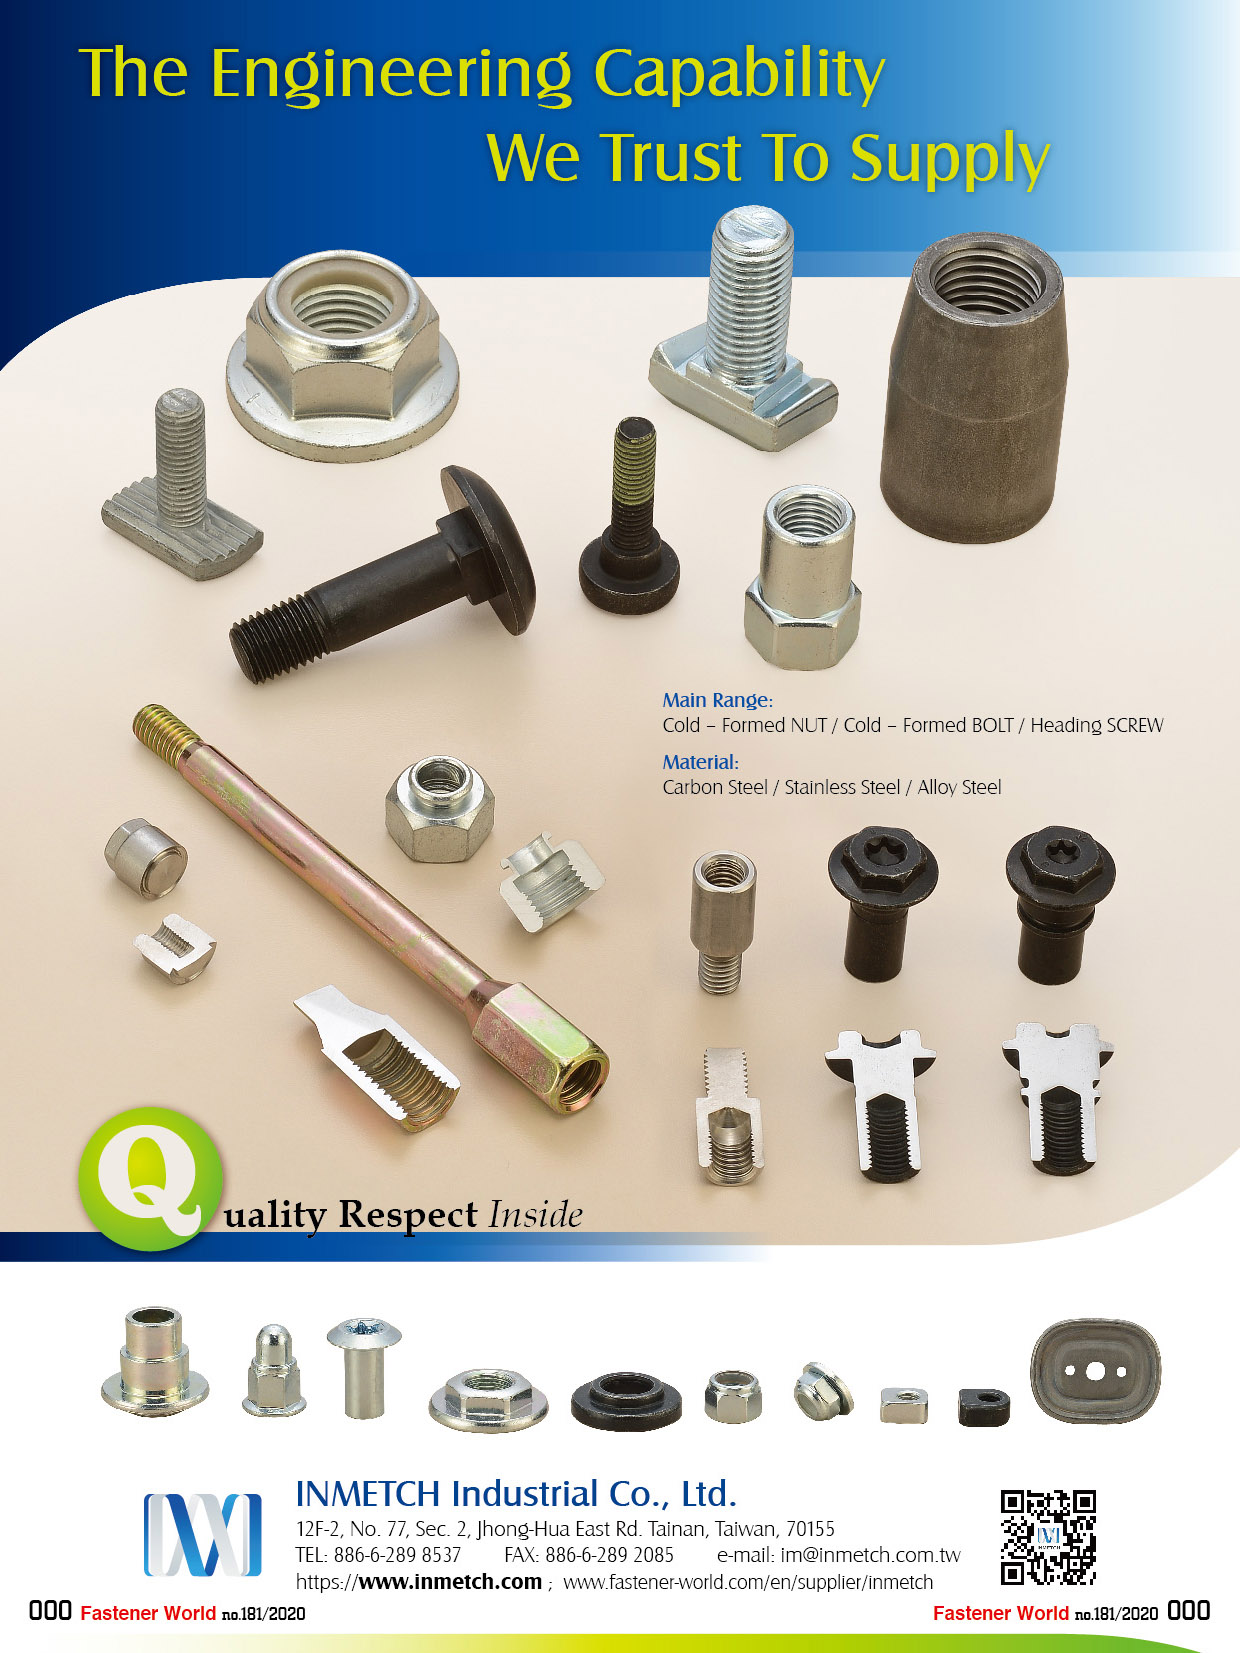 INMETCH INDUSTRIAL CO., LTD.  , Flanged Head Bolts, Locking Bolts, Stud Bolts, Cold - Formed Nuts, Cold - Formed Bolts, Heading Screws